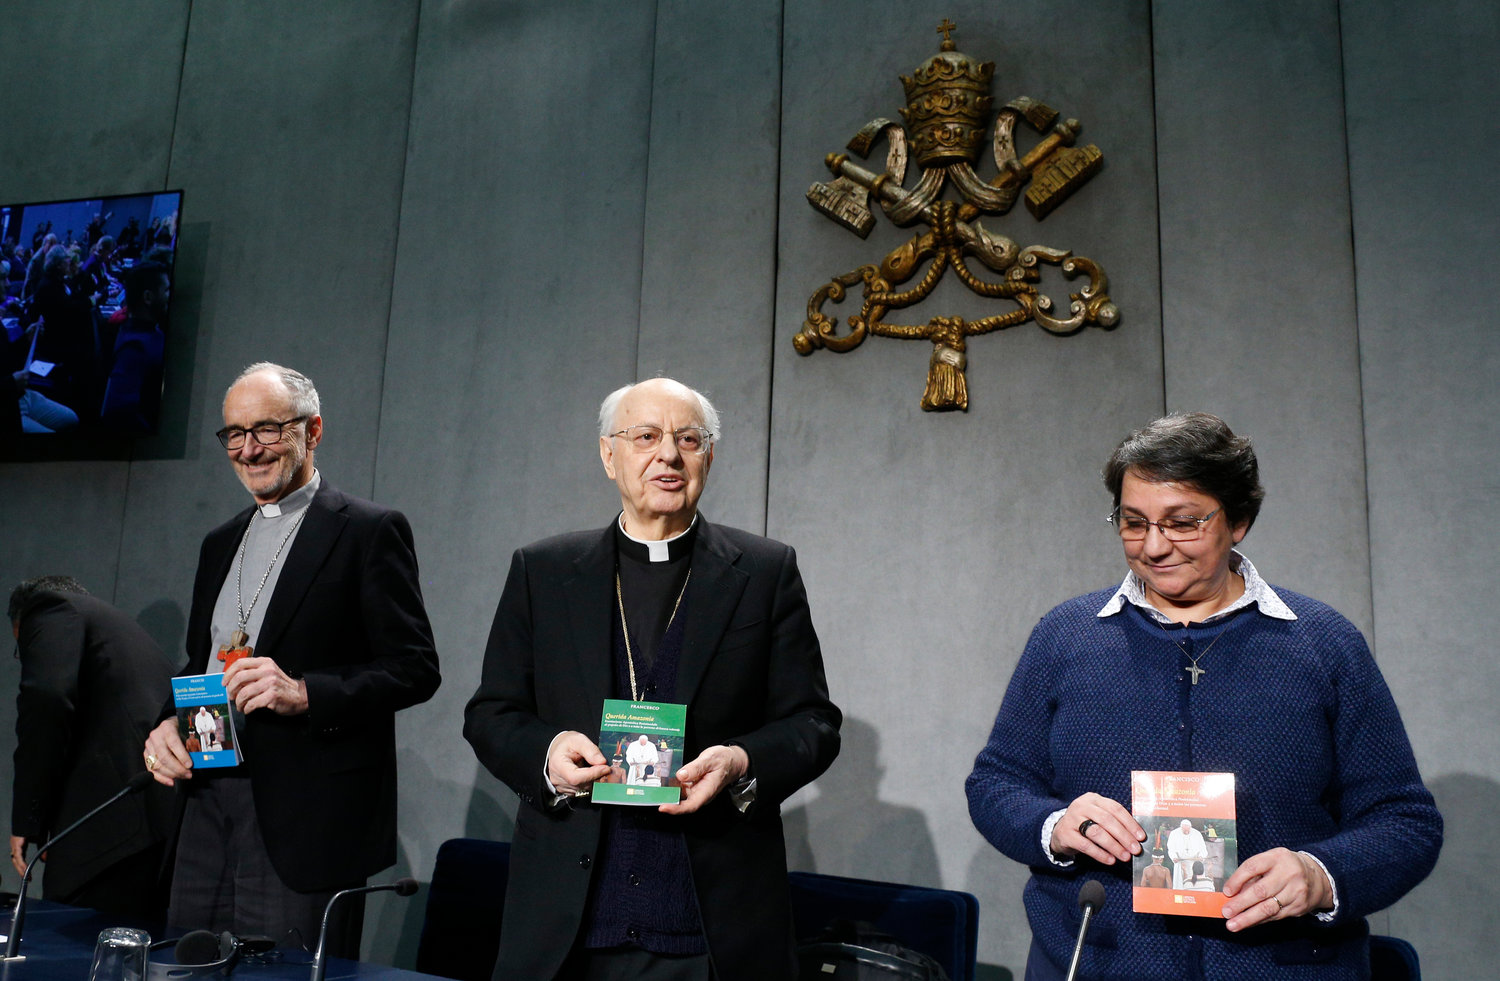 Cardinal Michael Czerny, Cardinal Lorenzo Baldisseri, and Sister Augusta de Oliveira hold copies of Pope Francis' apostolic exhortation, "Querida Amazonia" (Beloved Amazonia), during its release at a news conference at the Vatican Feb. 12, 2020. The document contains the pope's conclusions from the 2019 Synod of Bishops for the Amazon.